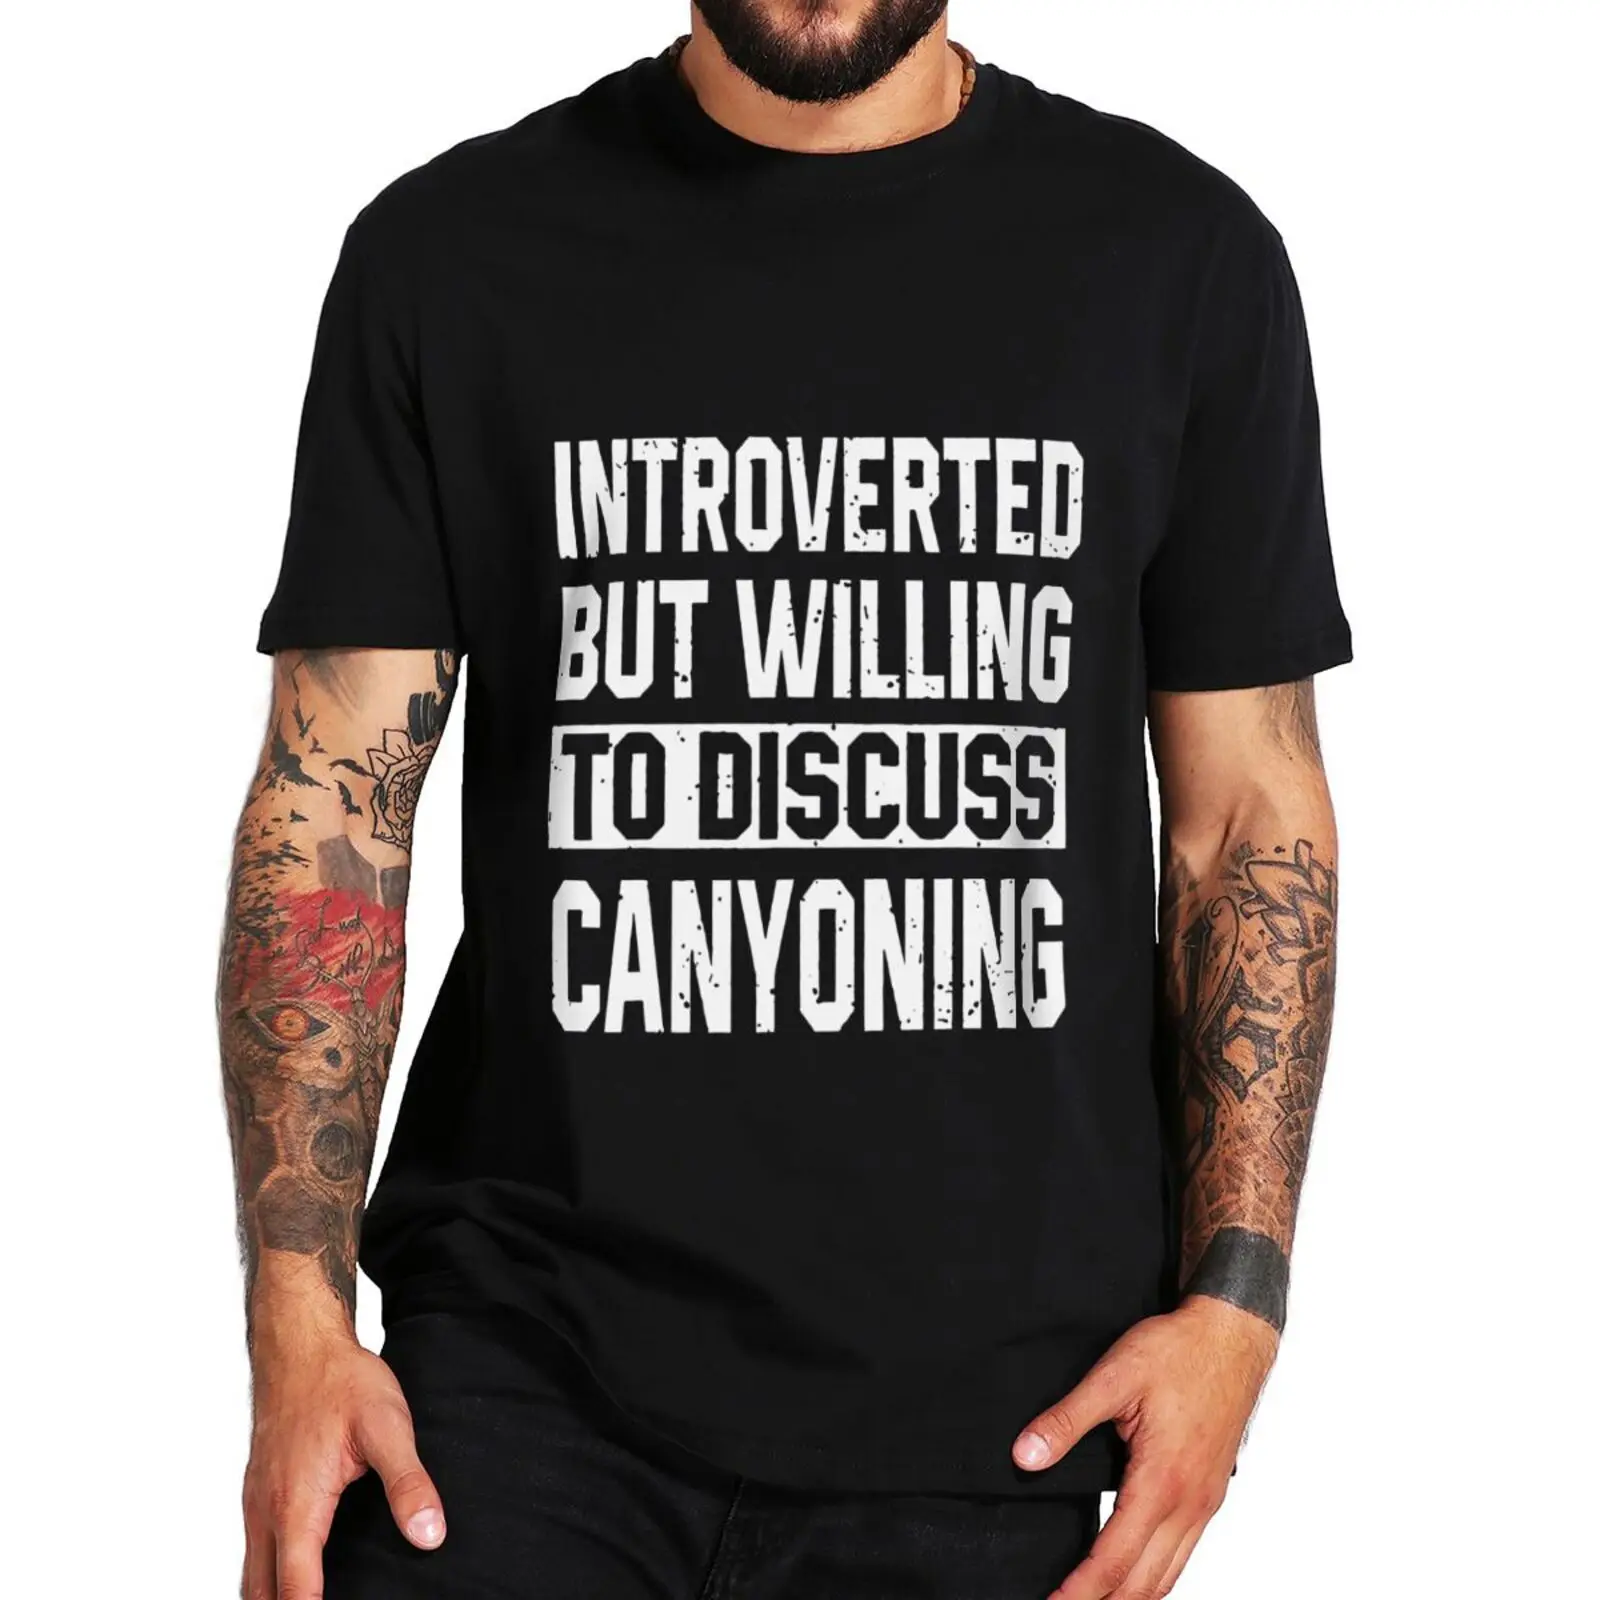 

Introverted But Willing To Talk About Canyoning T Shirt Funny Sports Lovers Gift Tee Tops Soft Unisex Cotton Casual T-shirts